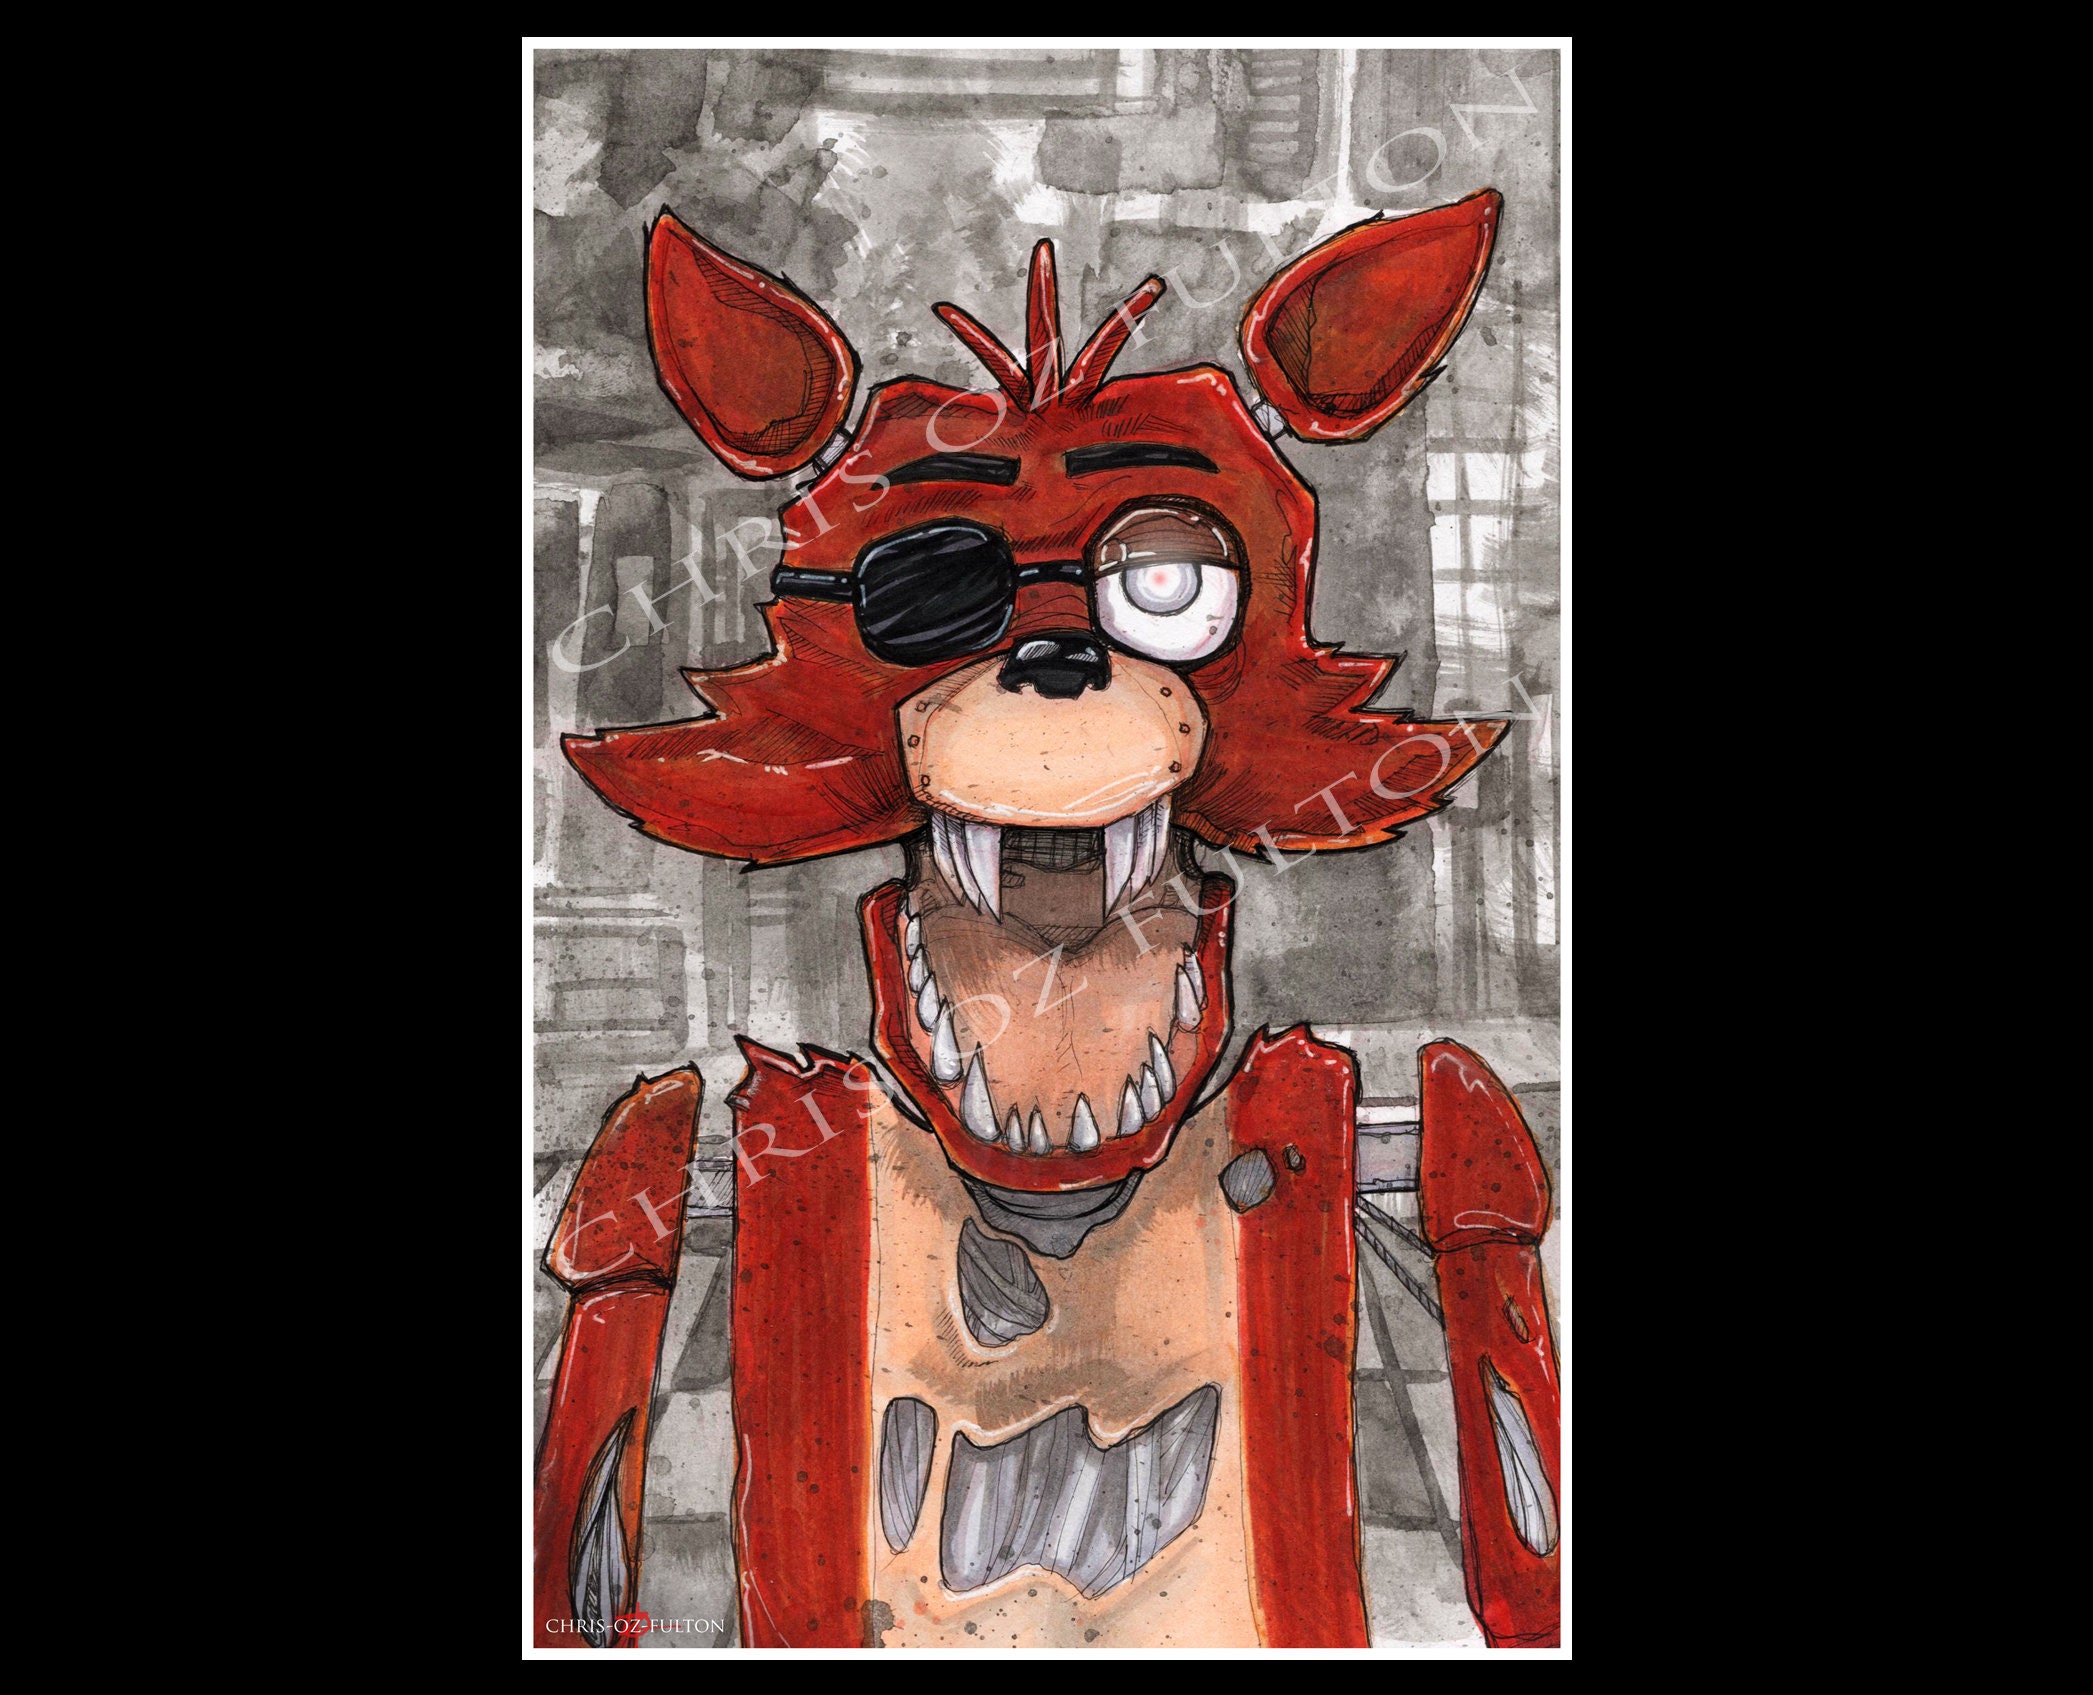 withered foxy Canvas Print for Sale by dogbiird